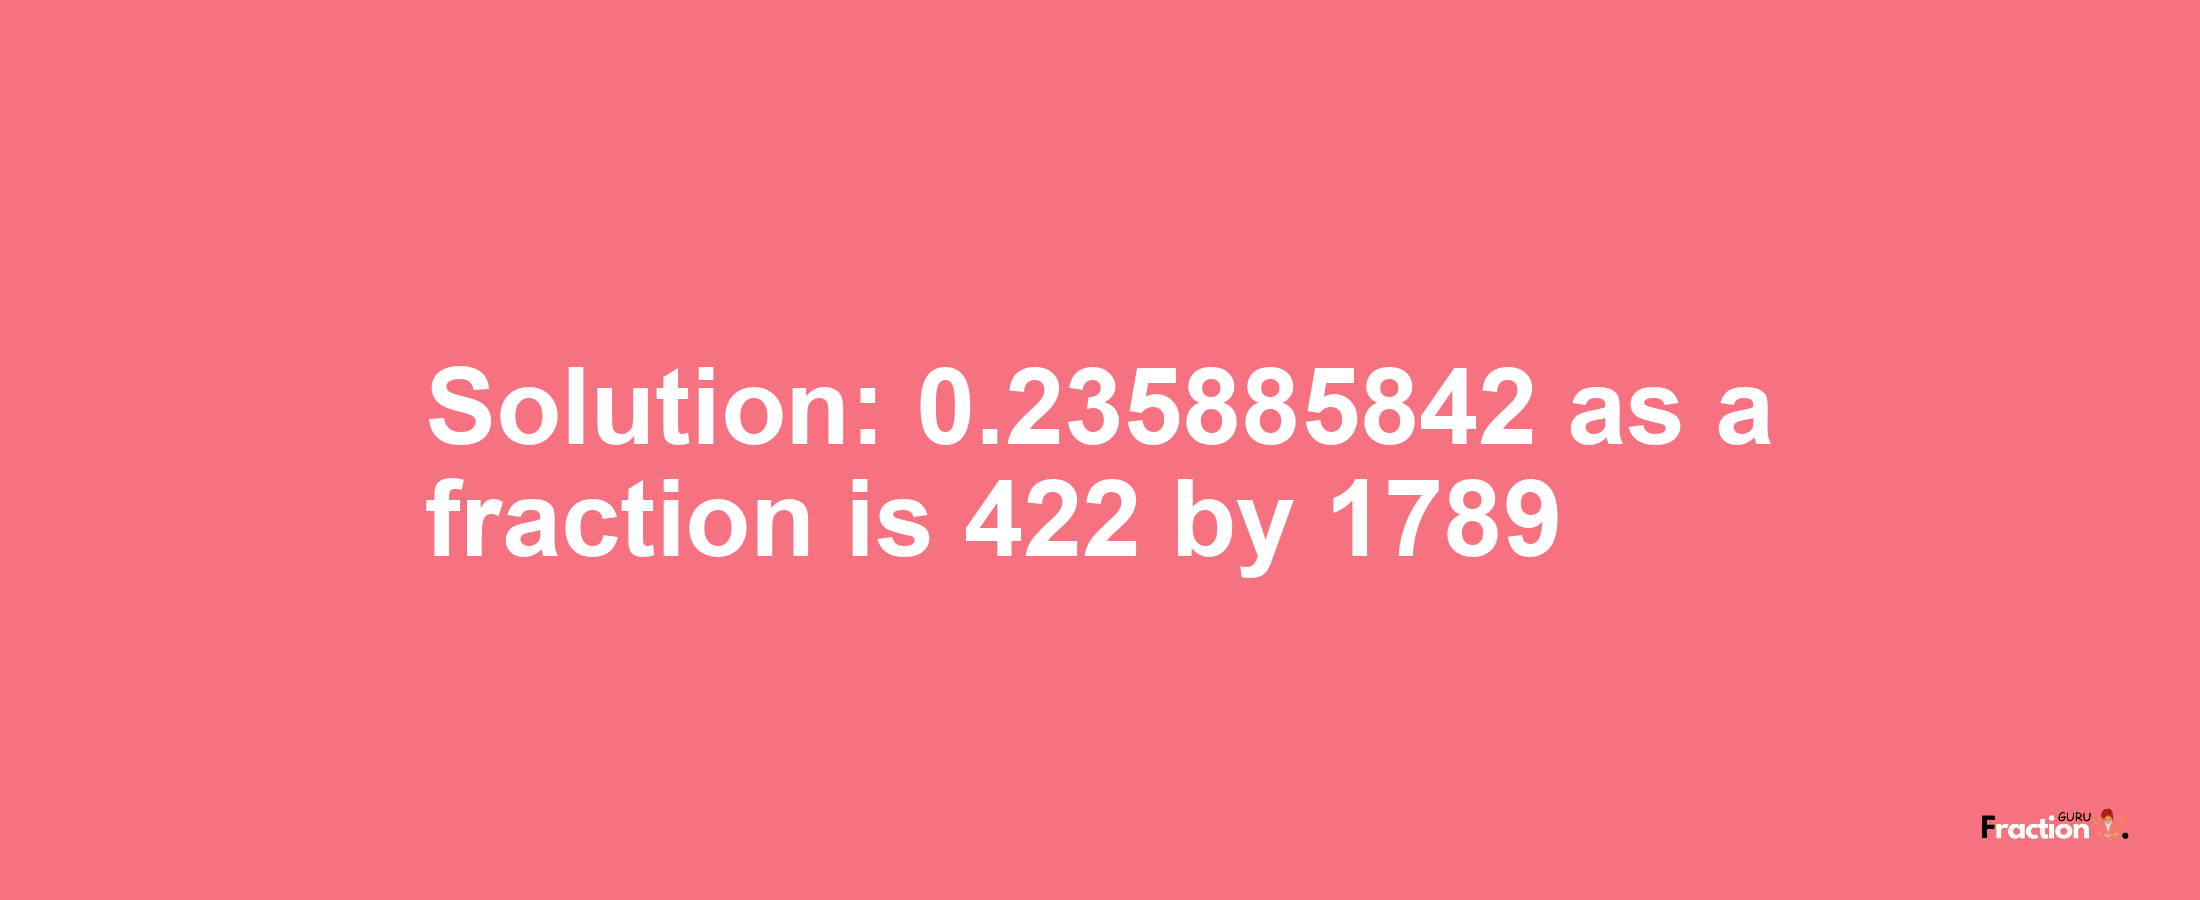 Solution:0.235885842 as a fraction is 422/1789